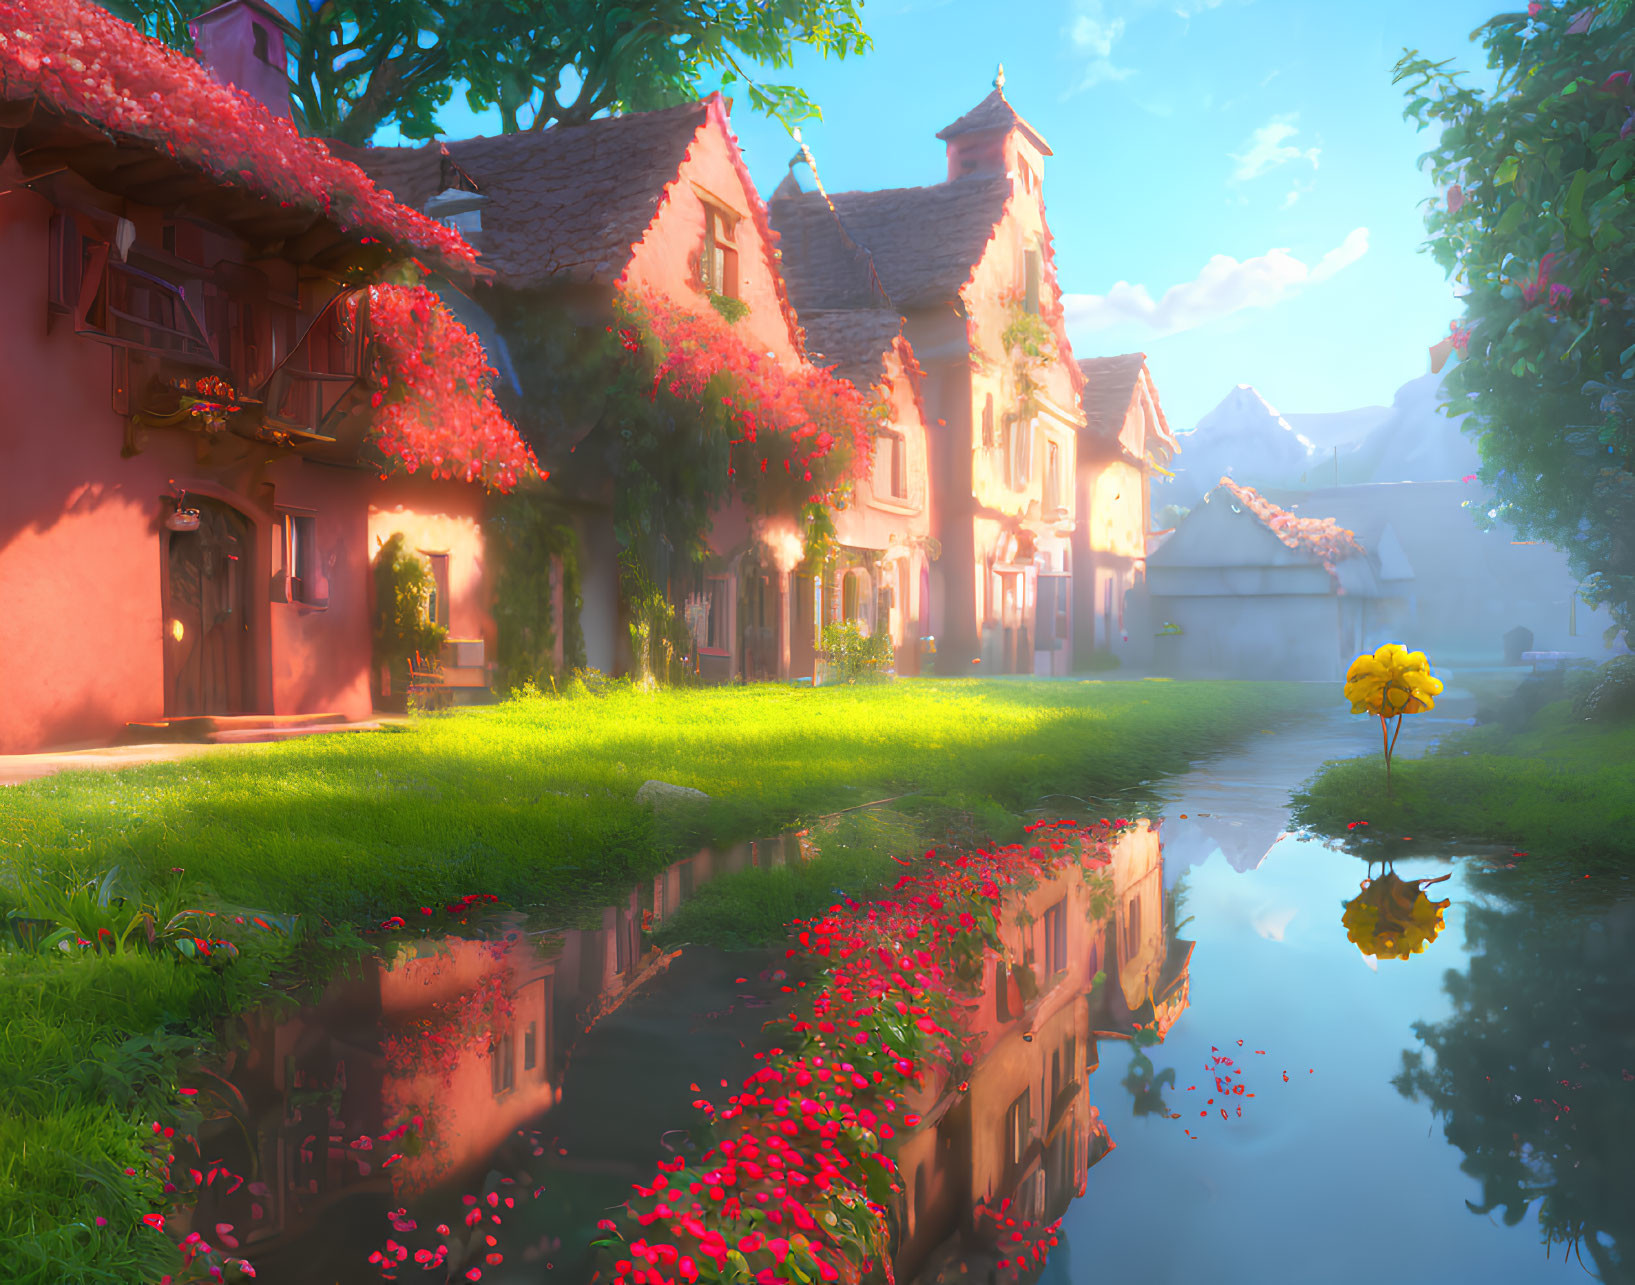 Tranquil village scene with red vines, reflective water, and sunny ambiance